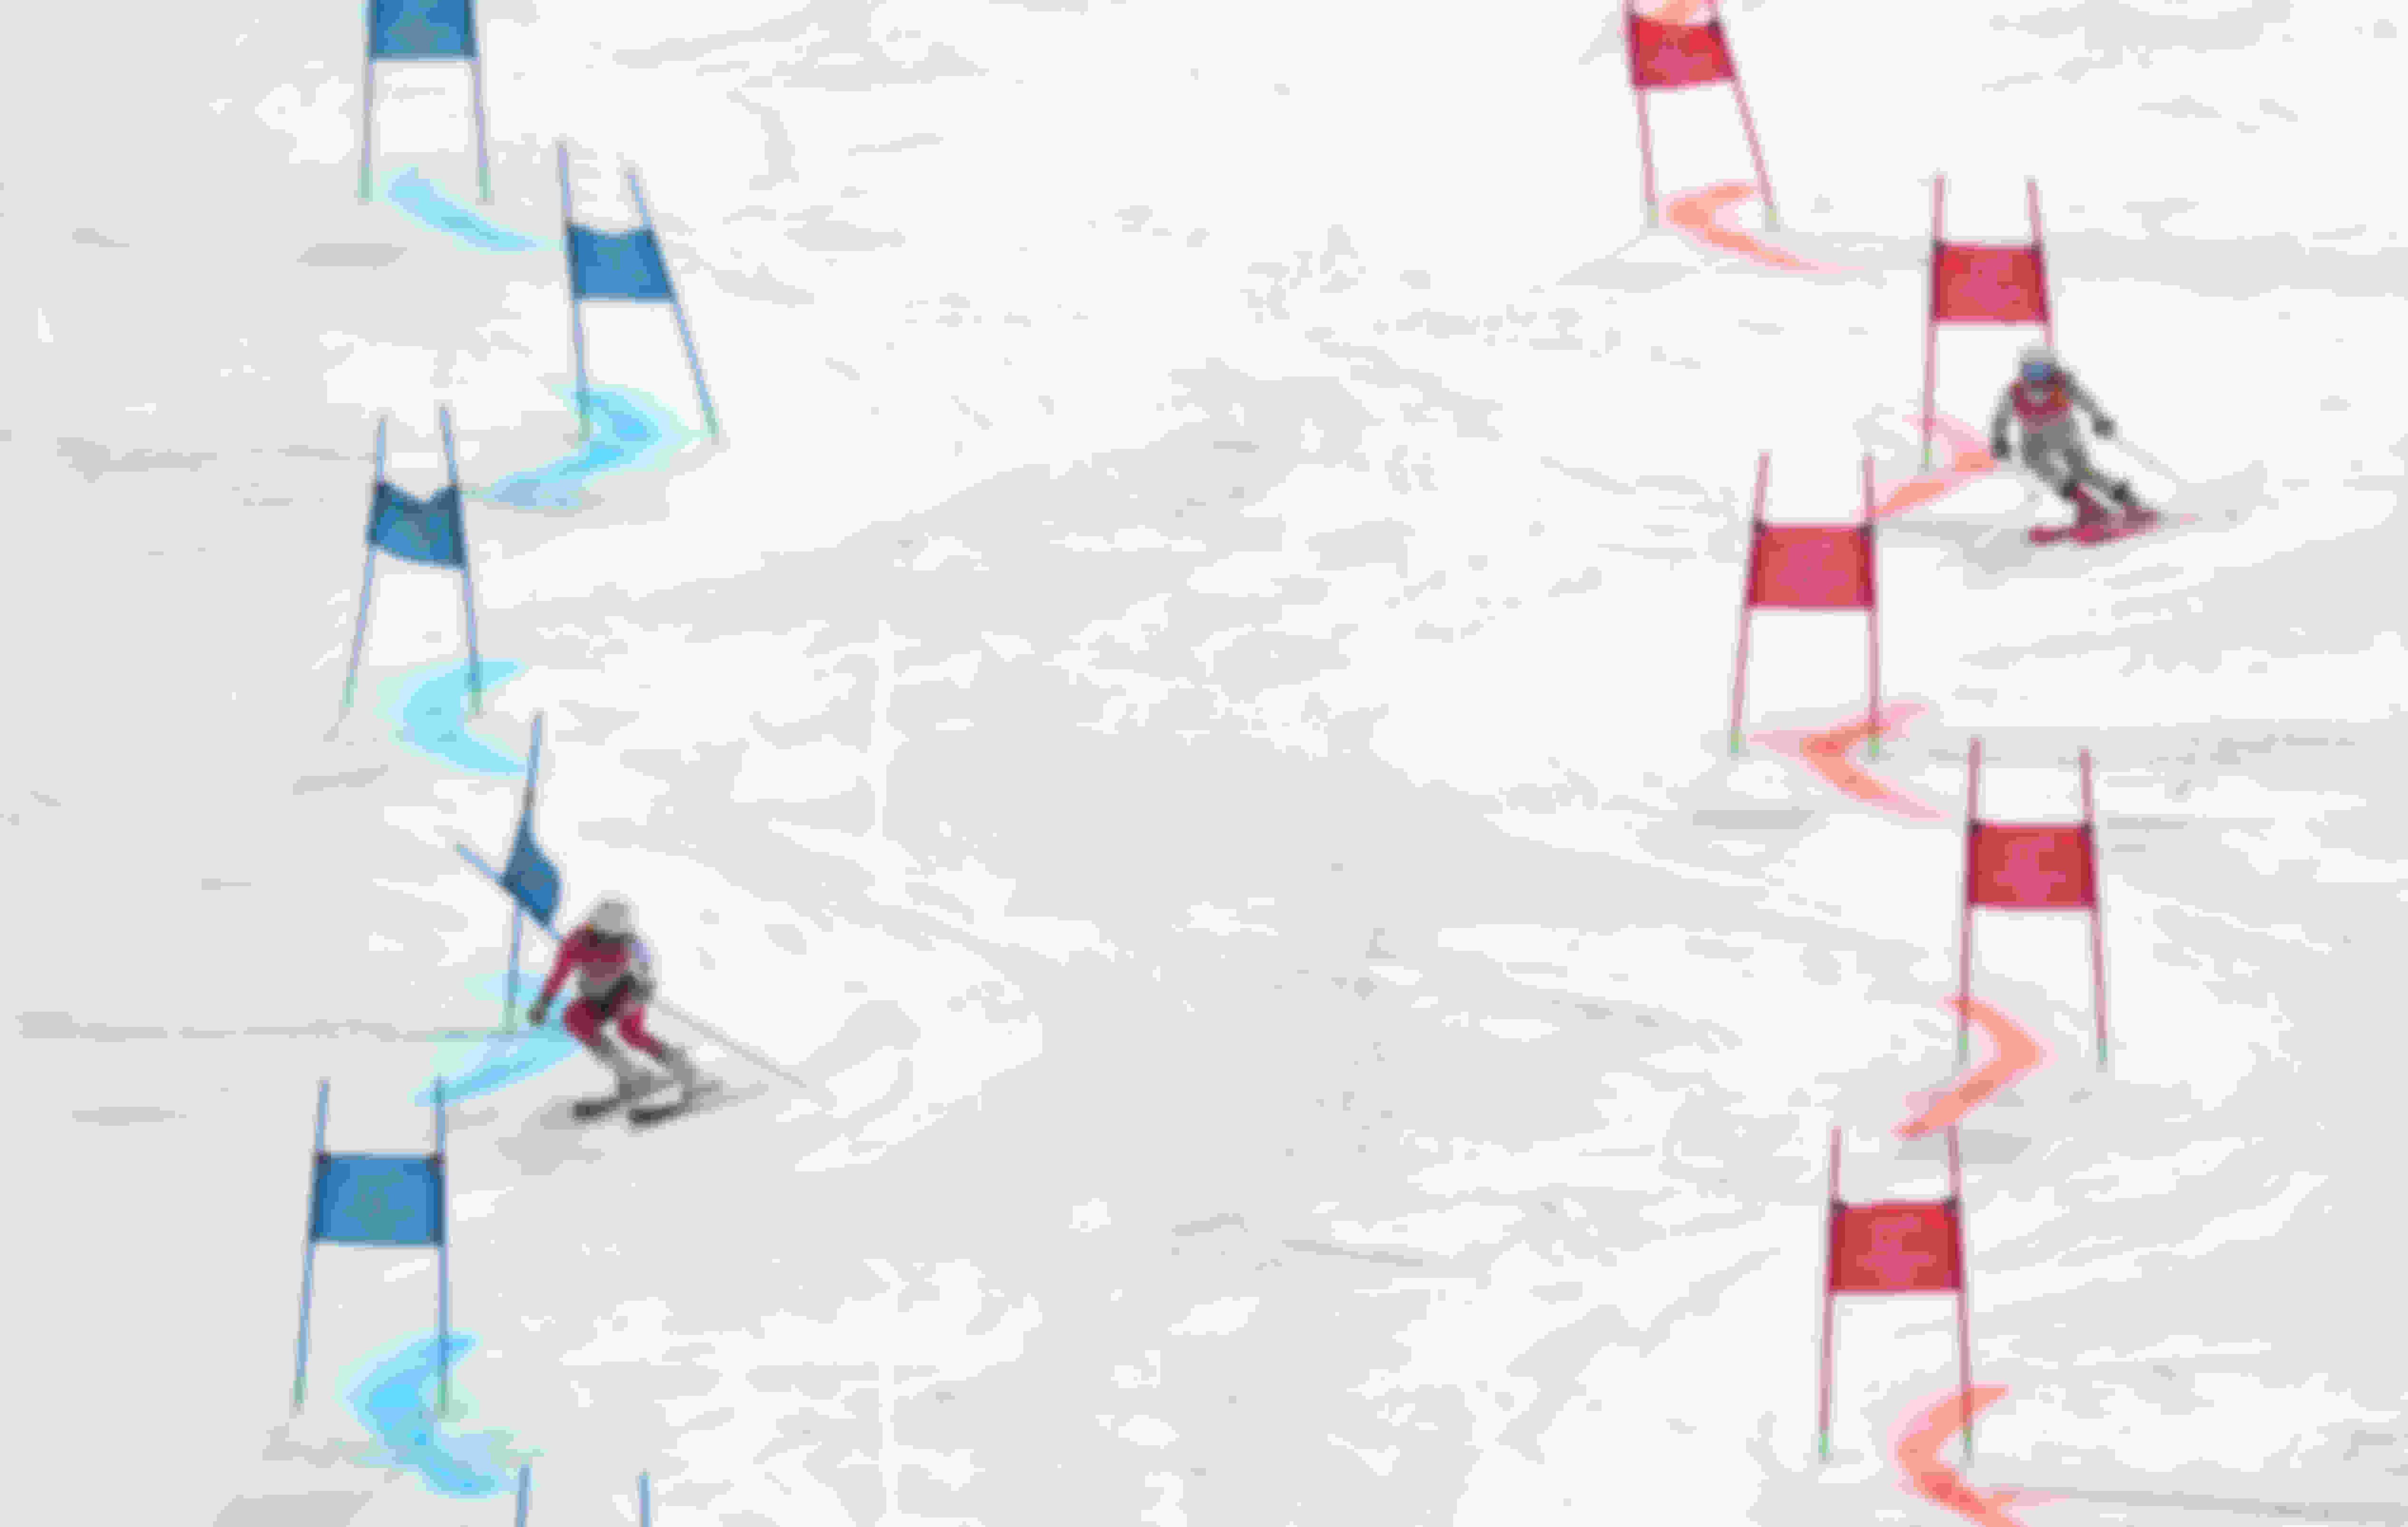 Mixed team parallel skiing